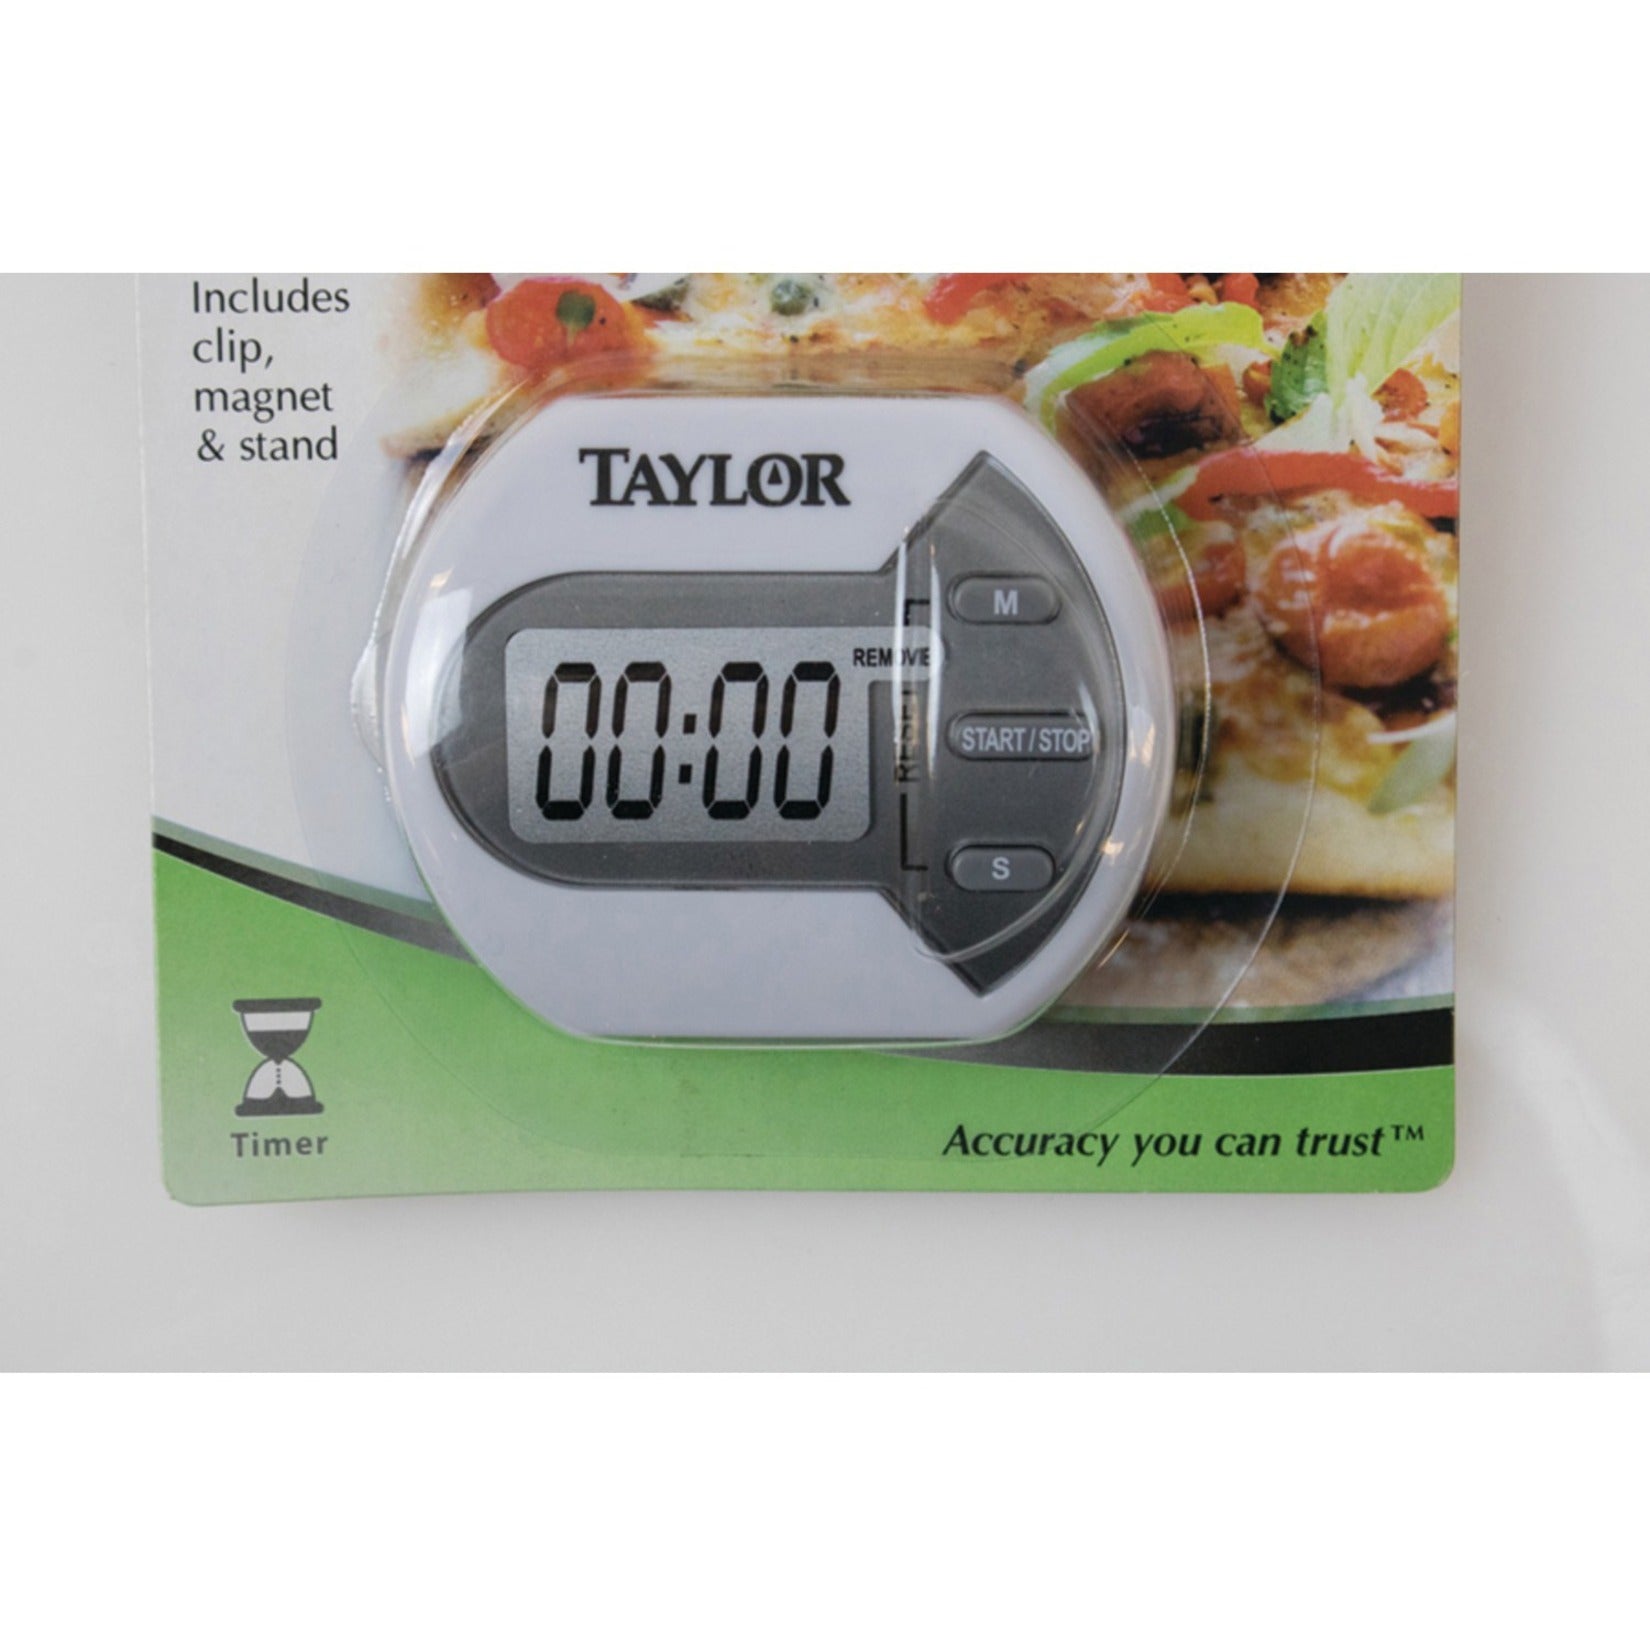 Taylor 5806 Digital Timer LCD Display Count Down/Count Up